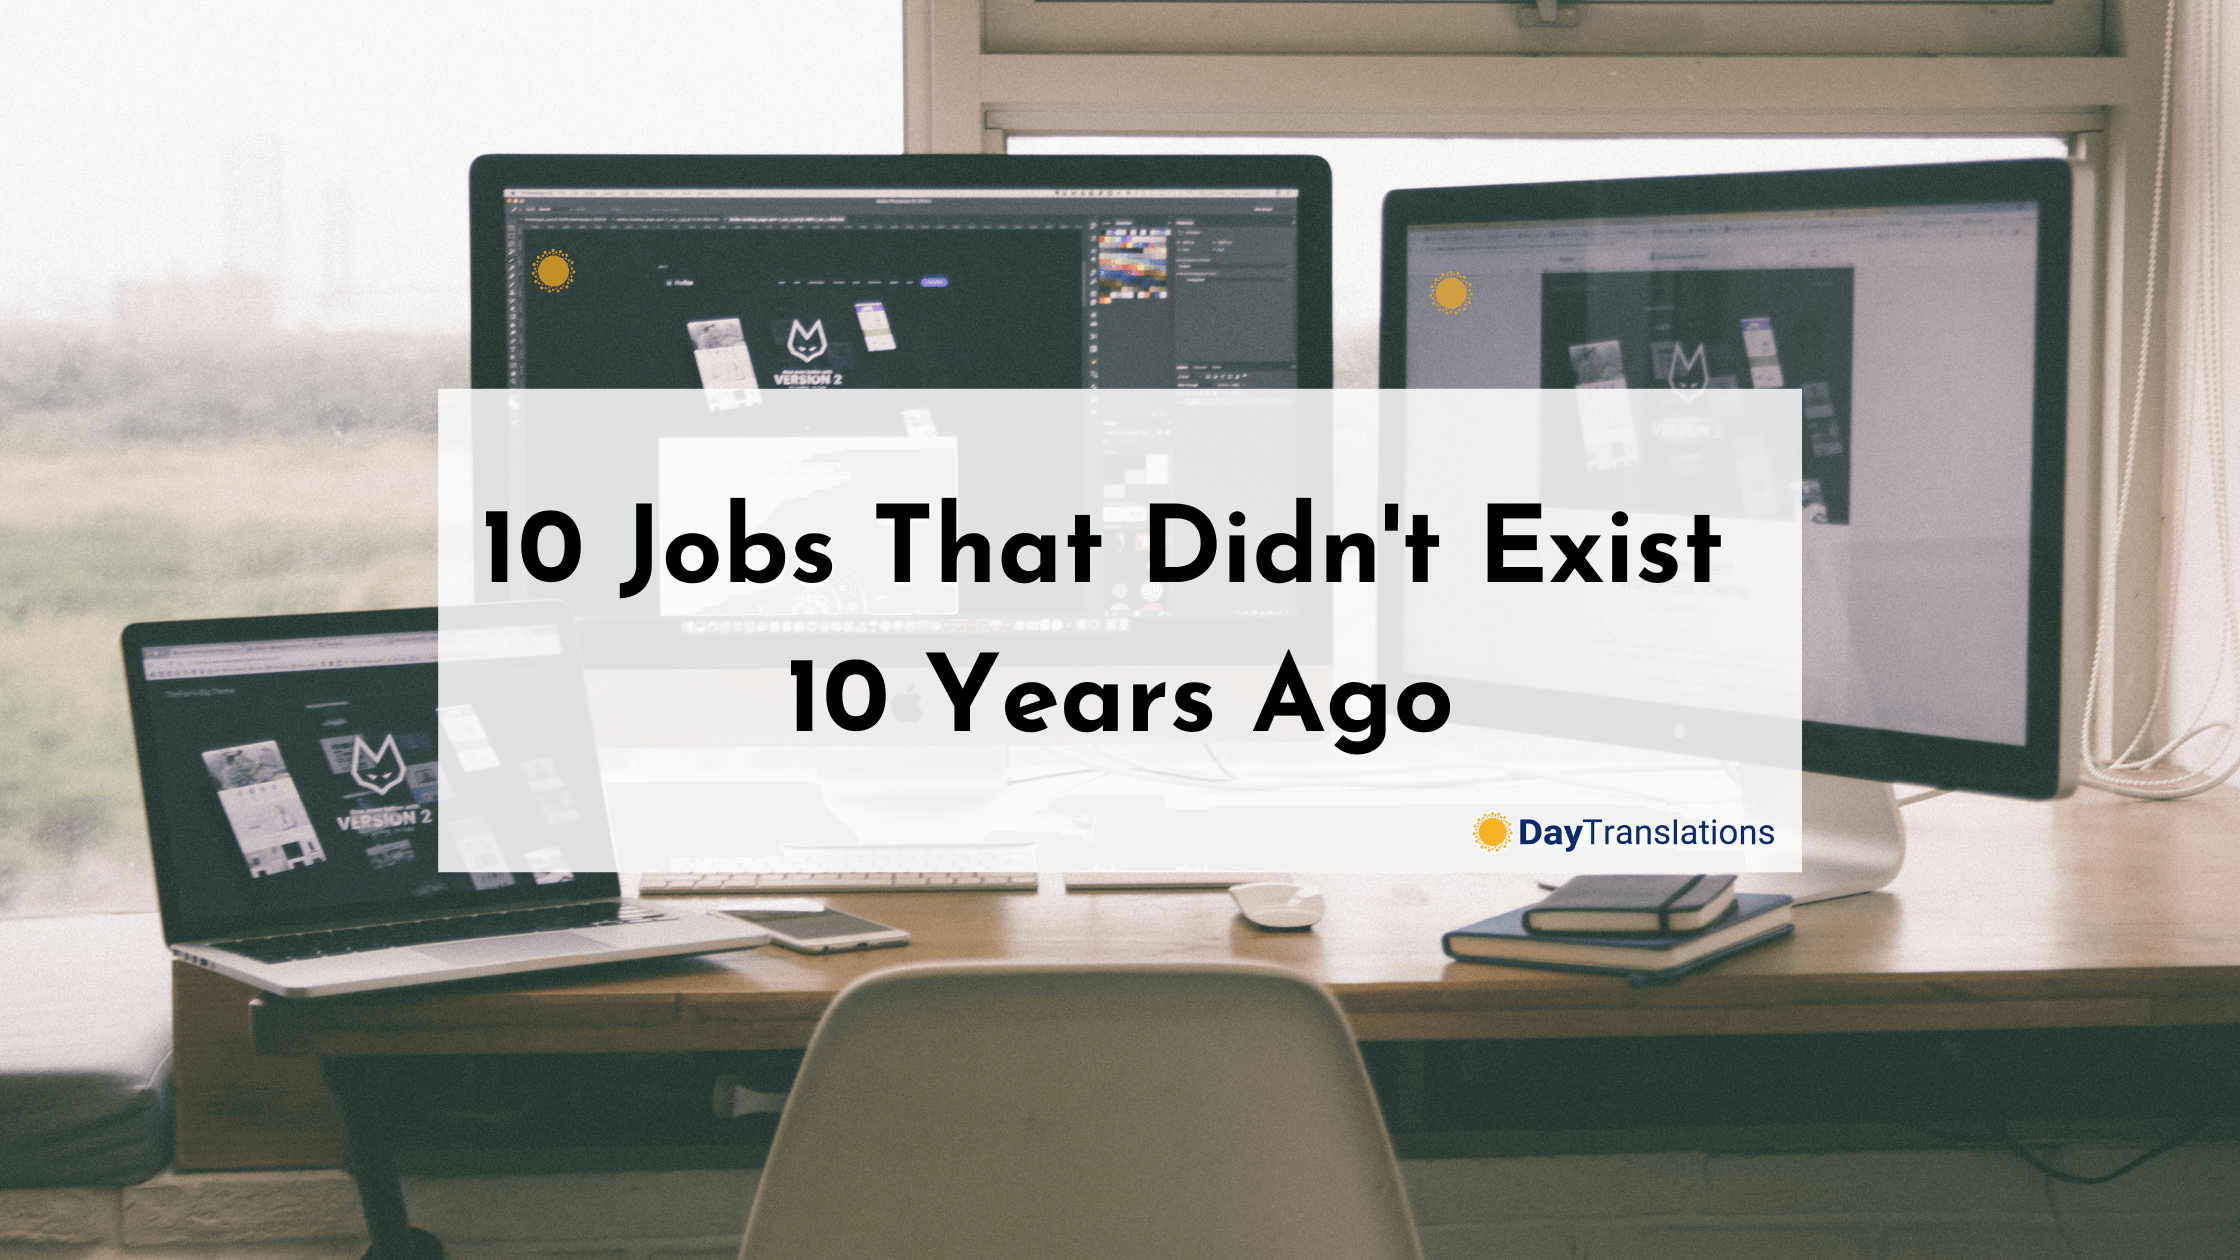 10 Jobs That Didn’t Exist 10 Years Ago